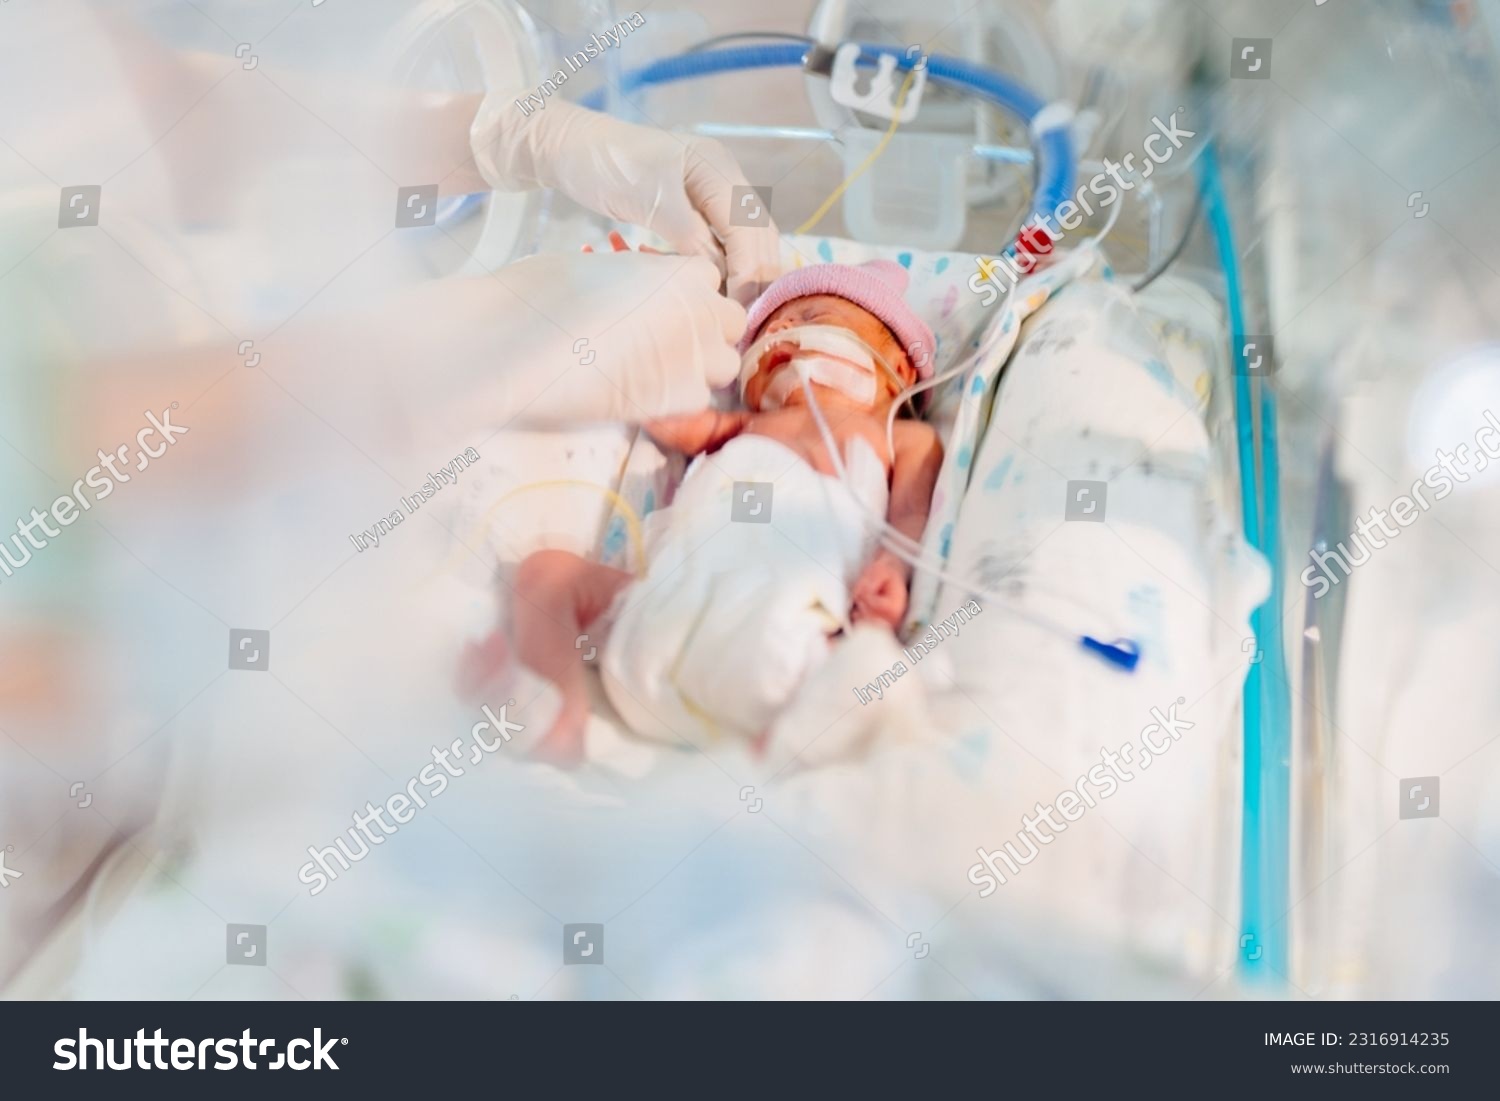 Unrecognizable hand in gloves of nurse or doctor taking care of premature baby placed in a medical incubator. Neonatal intensive care unit in hospital. #2316914235